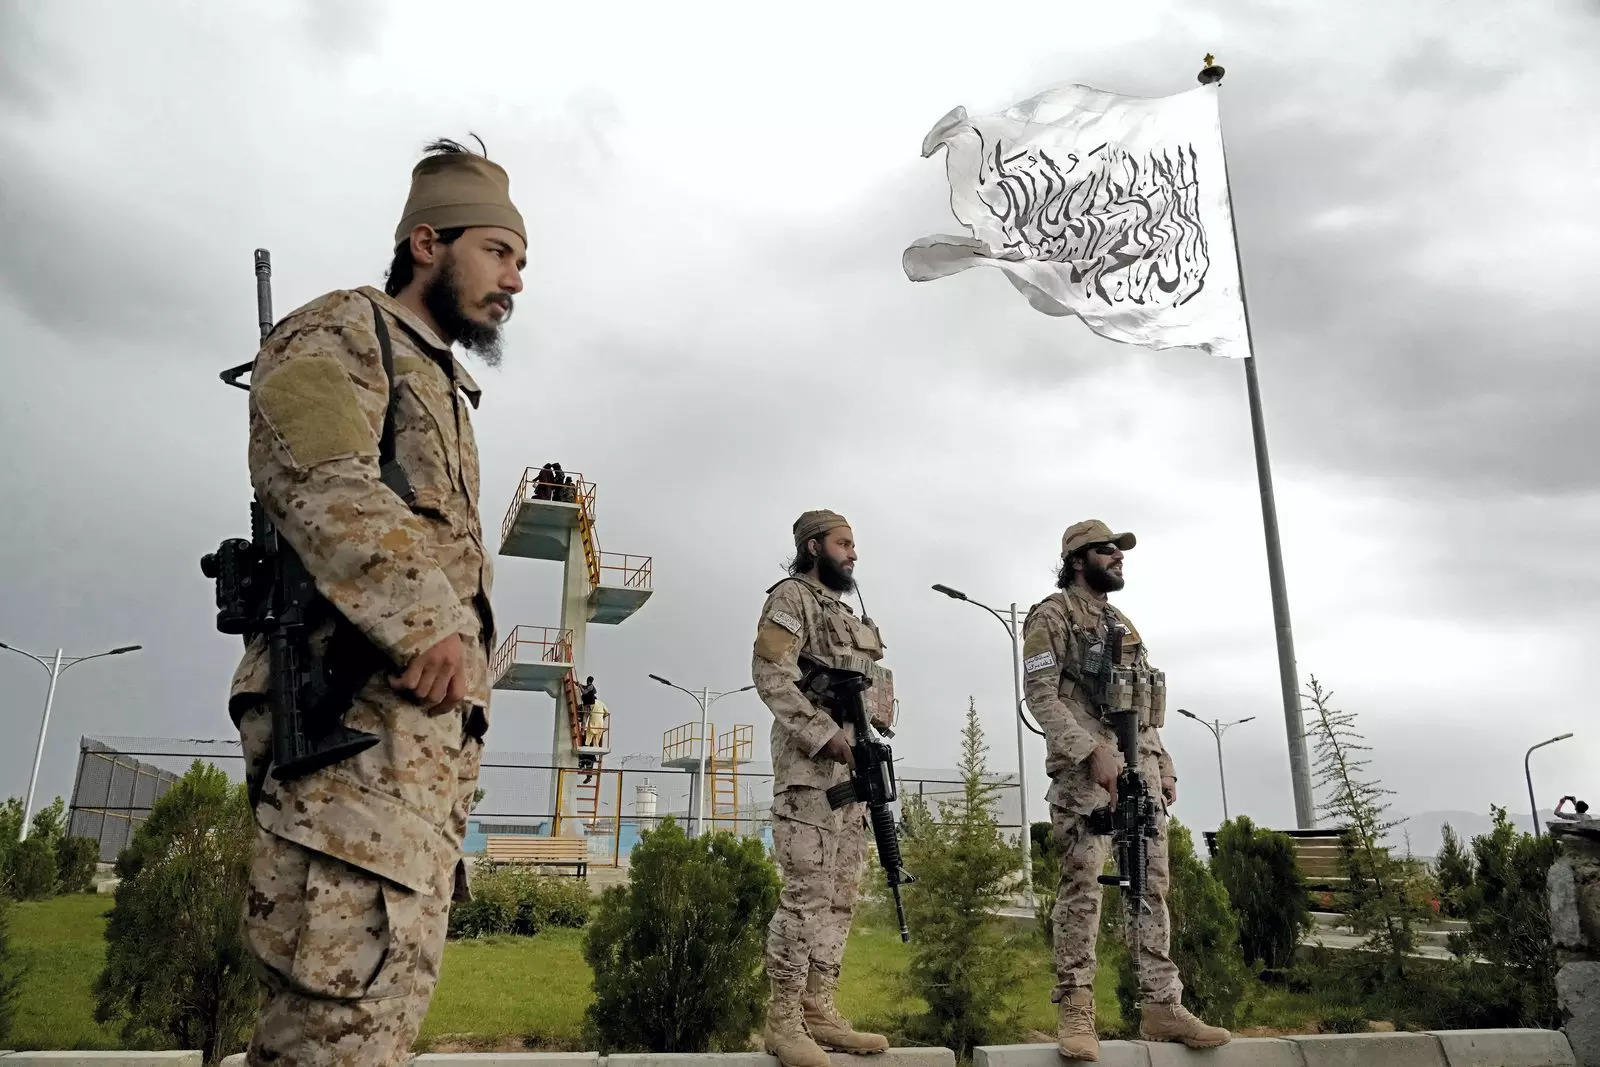 Taliban special forces stand guard in front of the Taliban flag